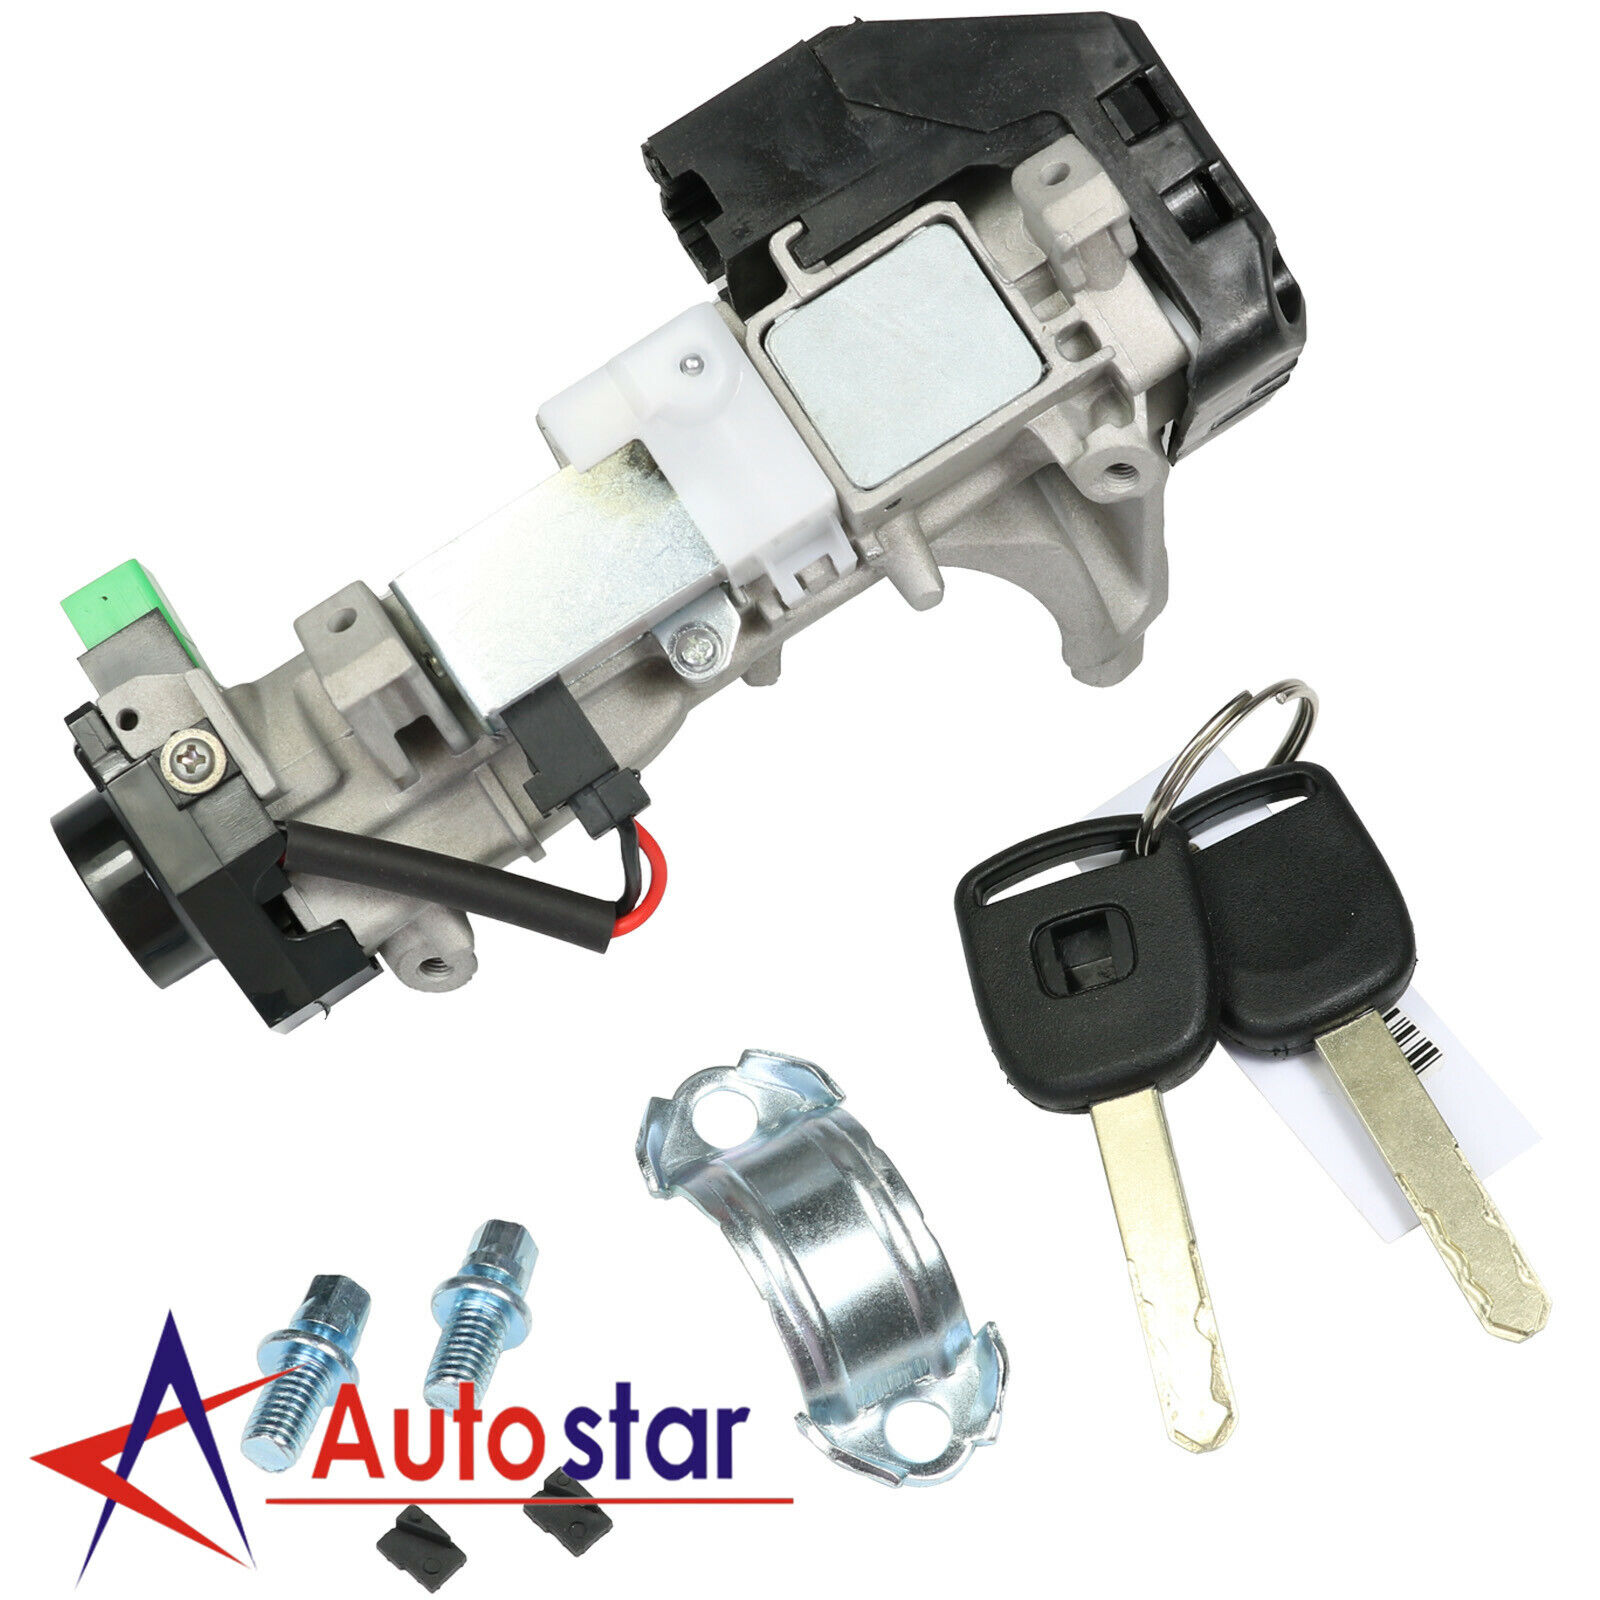 Ignition Switch Cylinder Lock Auto Trans For 2003-2007 Honda Accord With 2 Keys